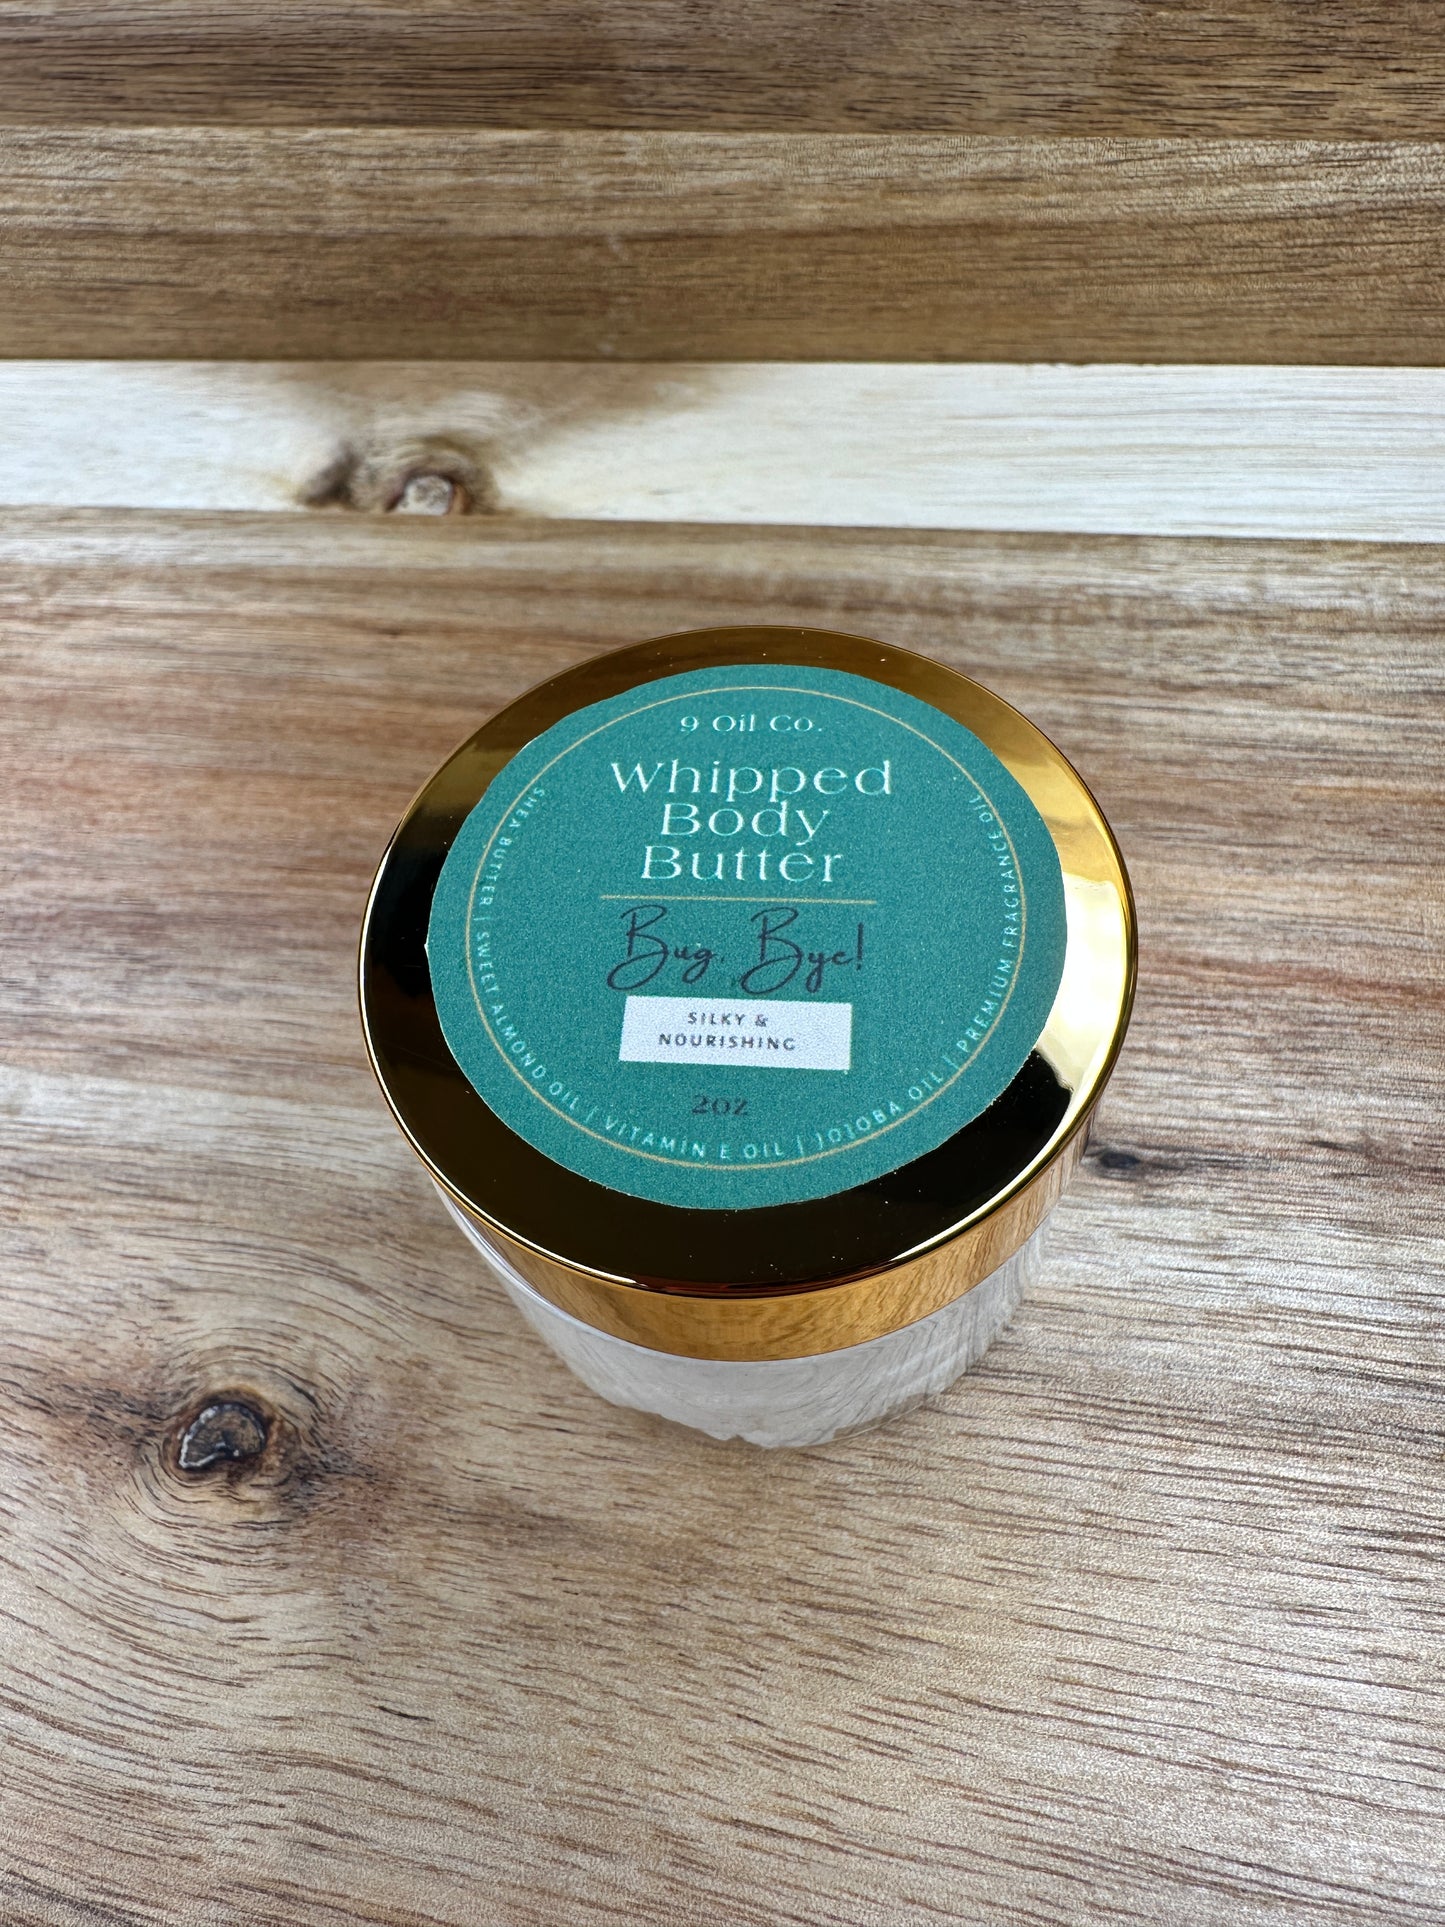 Bug, Bye! Whipped Body Butter